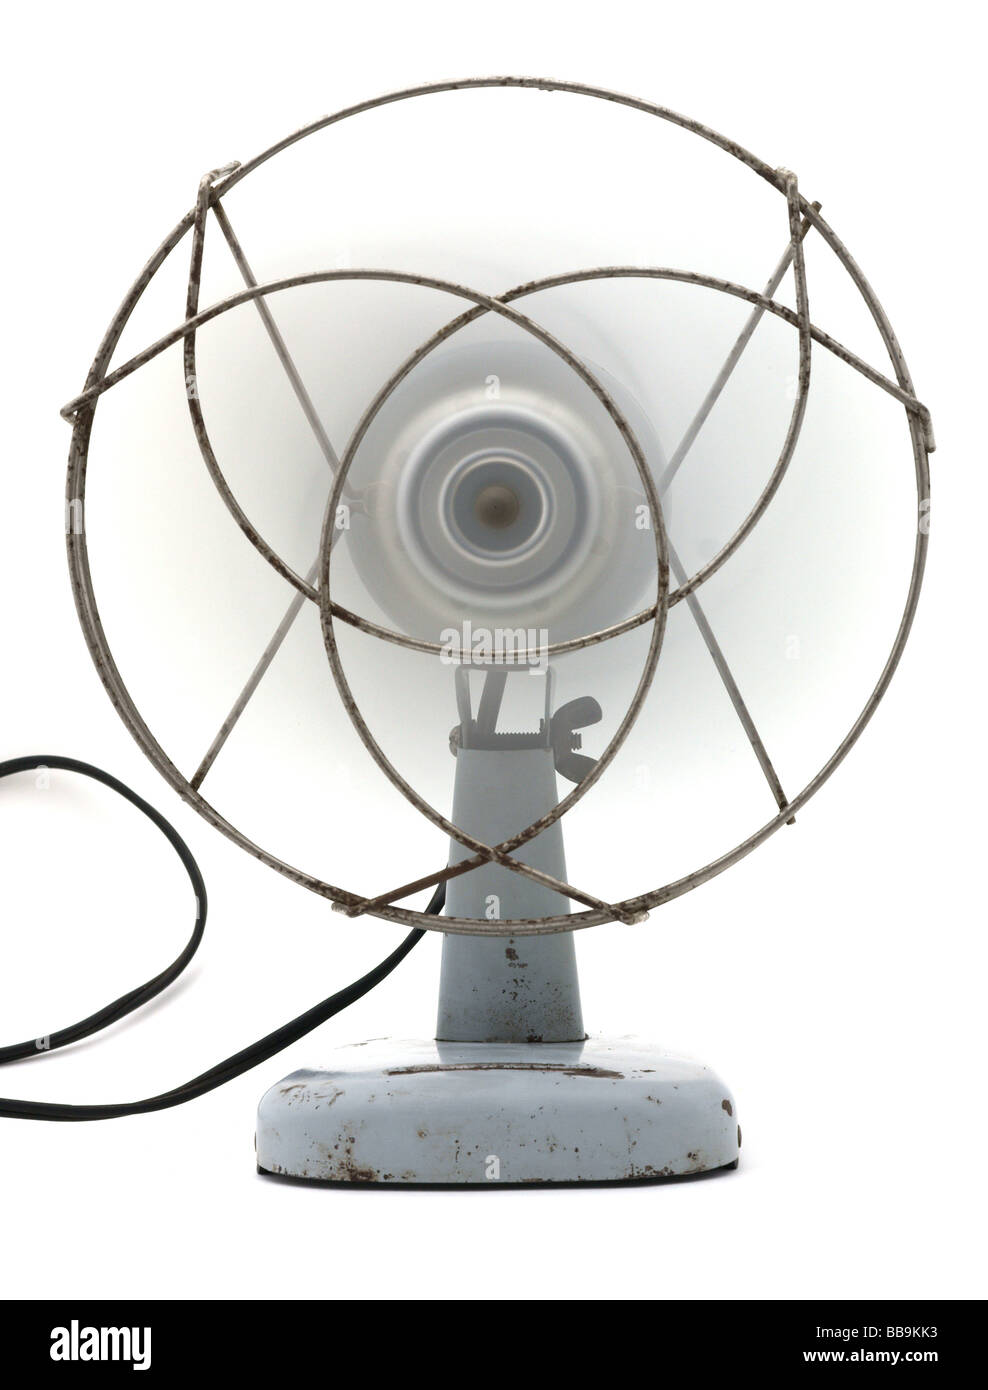 Old table fan Stock Photo